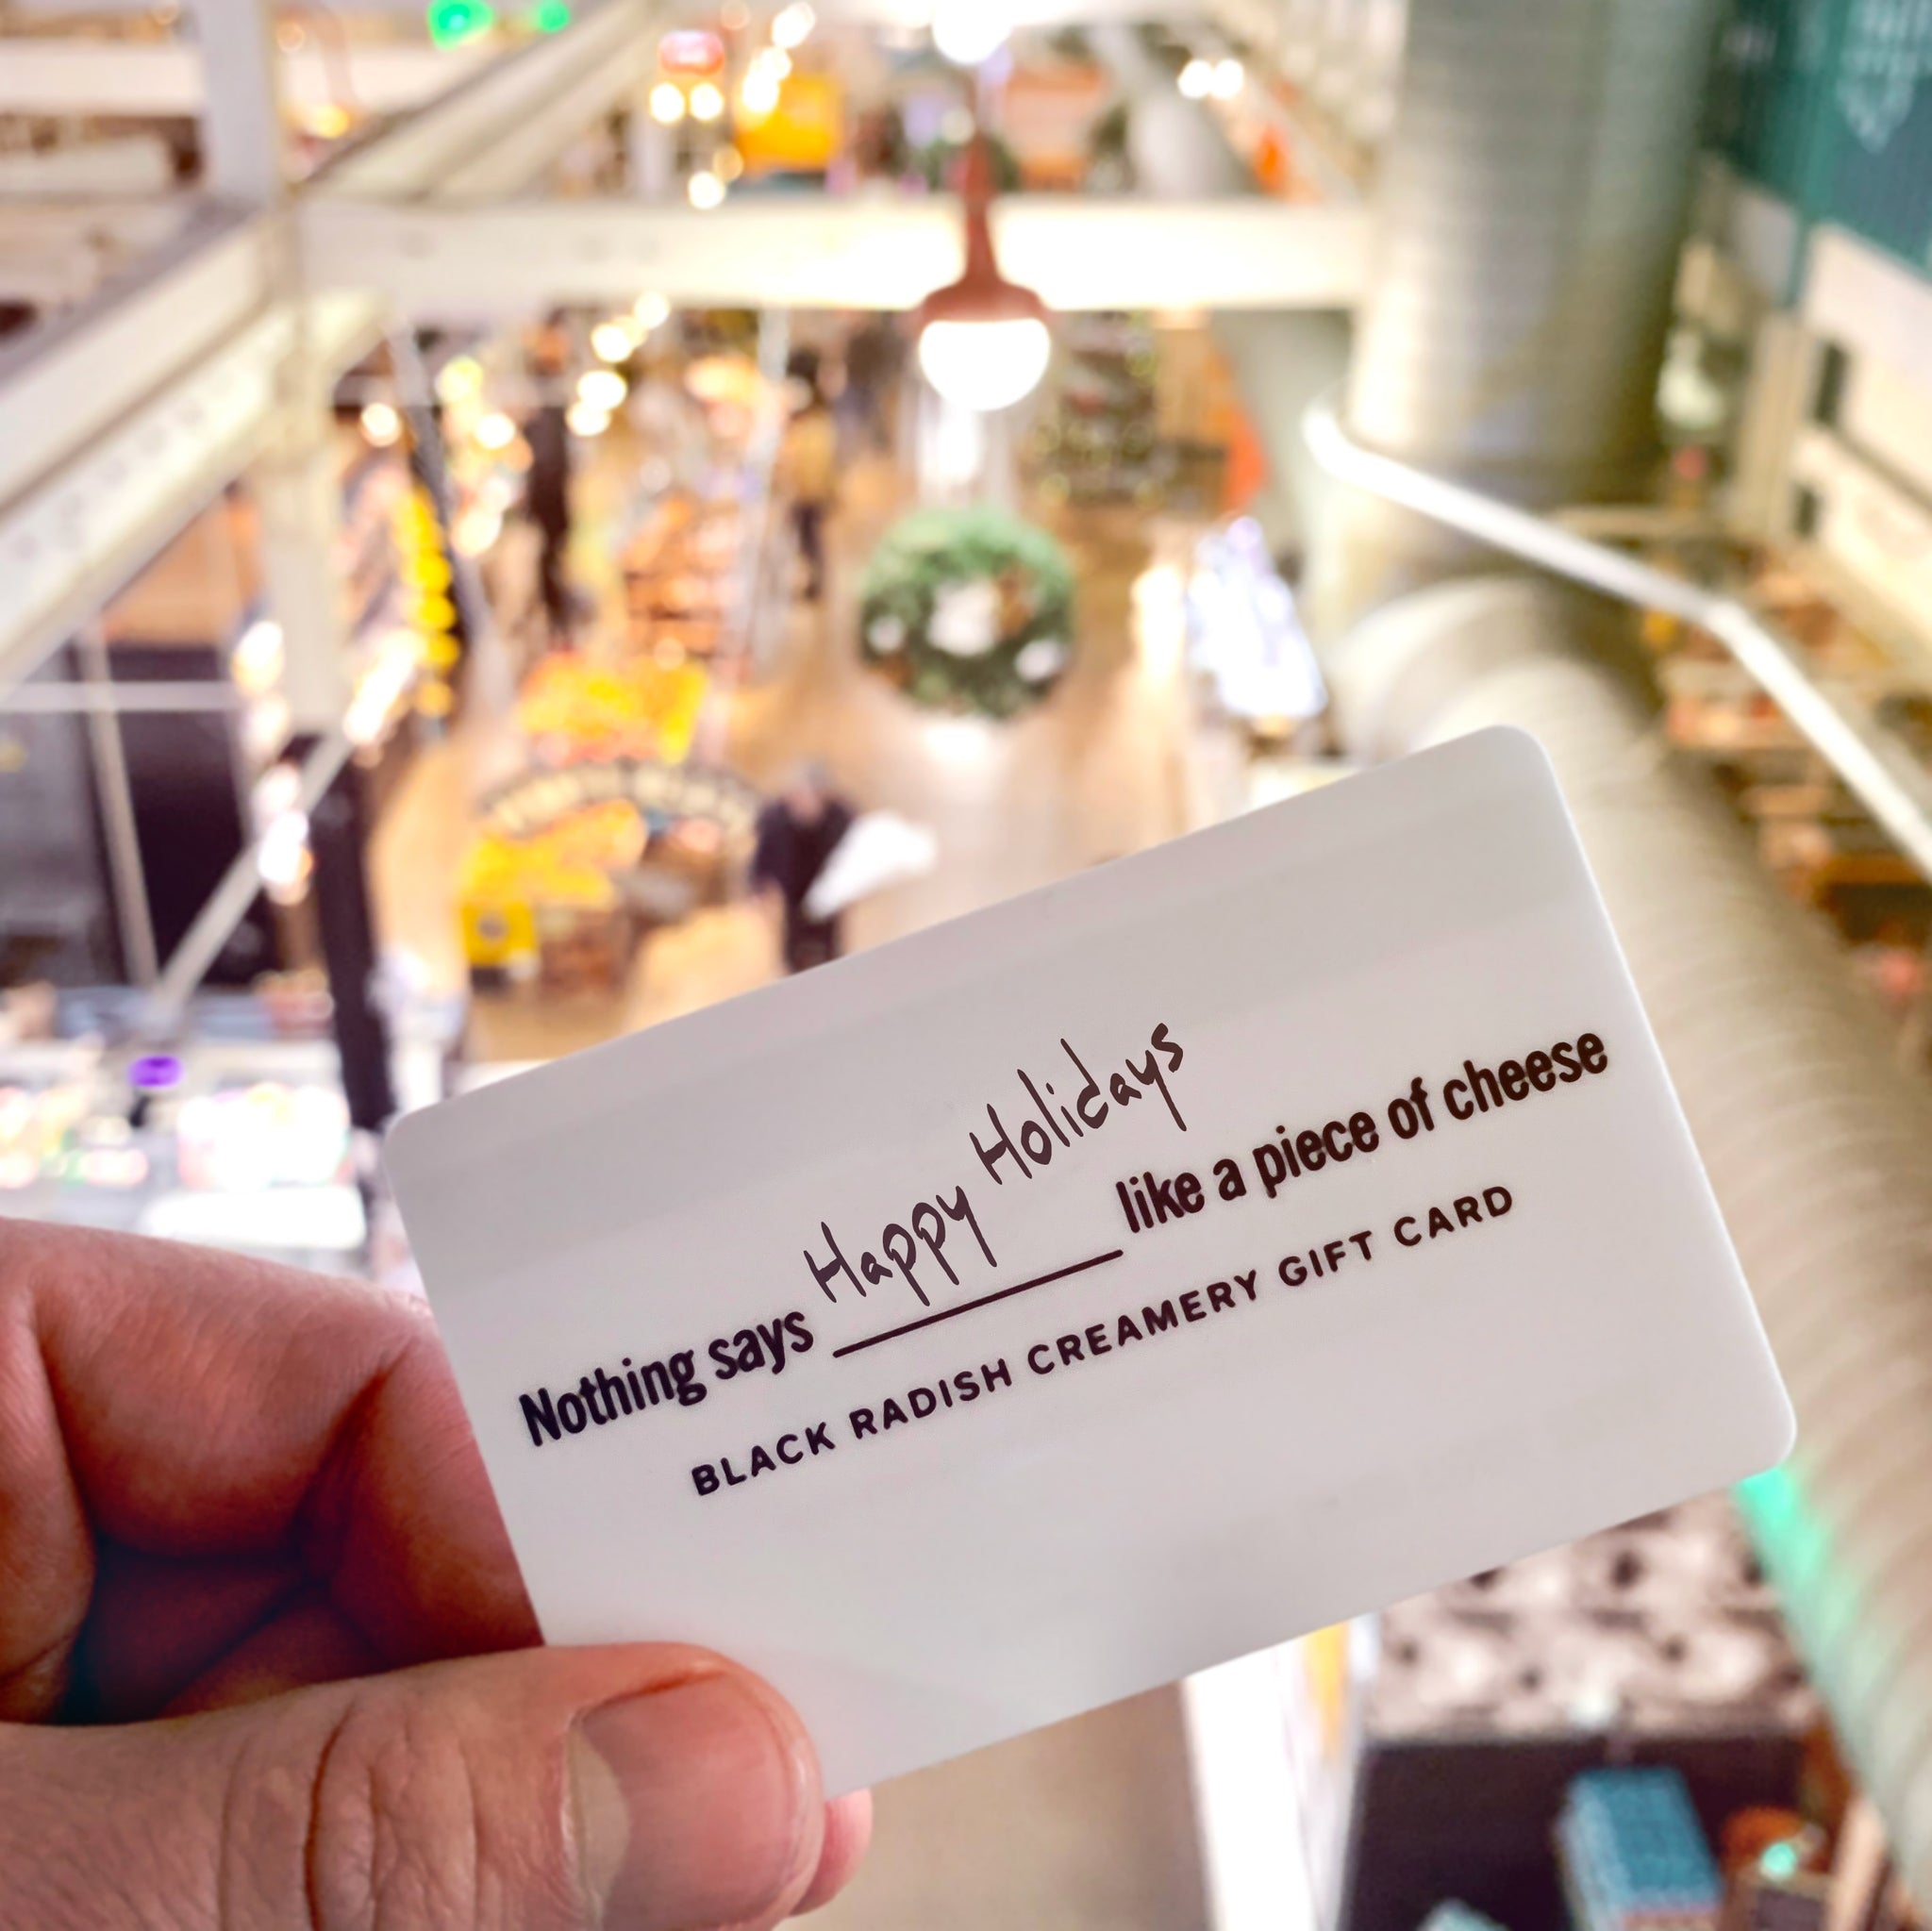 BRC GIFT CARDS NOW AVAILABLE AT NORTH MARKET!